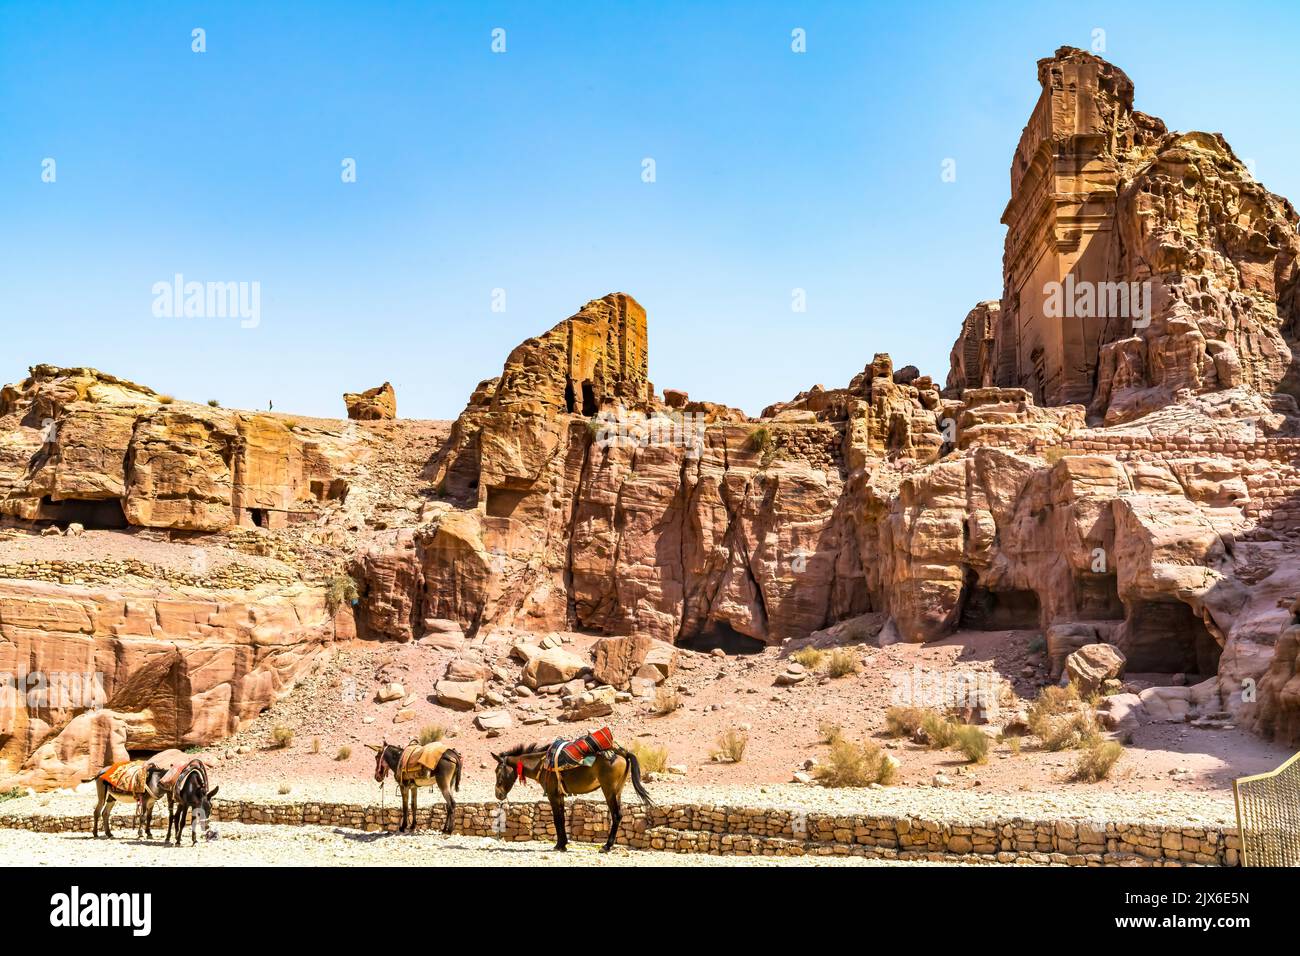 Donkeys Road to Royal Rock Tombs for Kings Petra Jordan Built by Nabataens in 200 BC to 400 AD Stock Photo